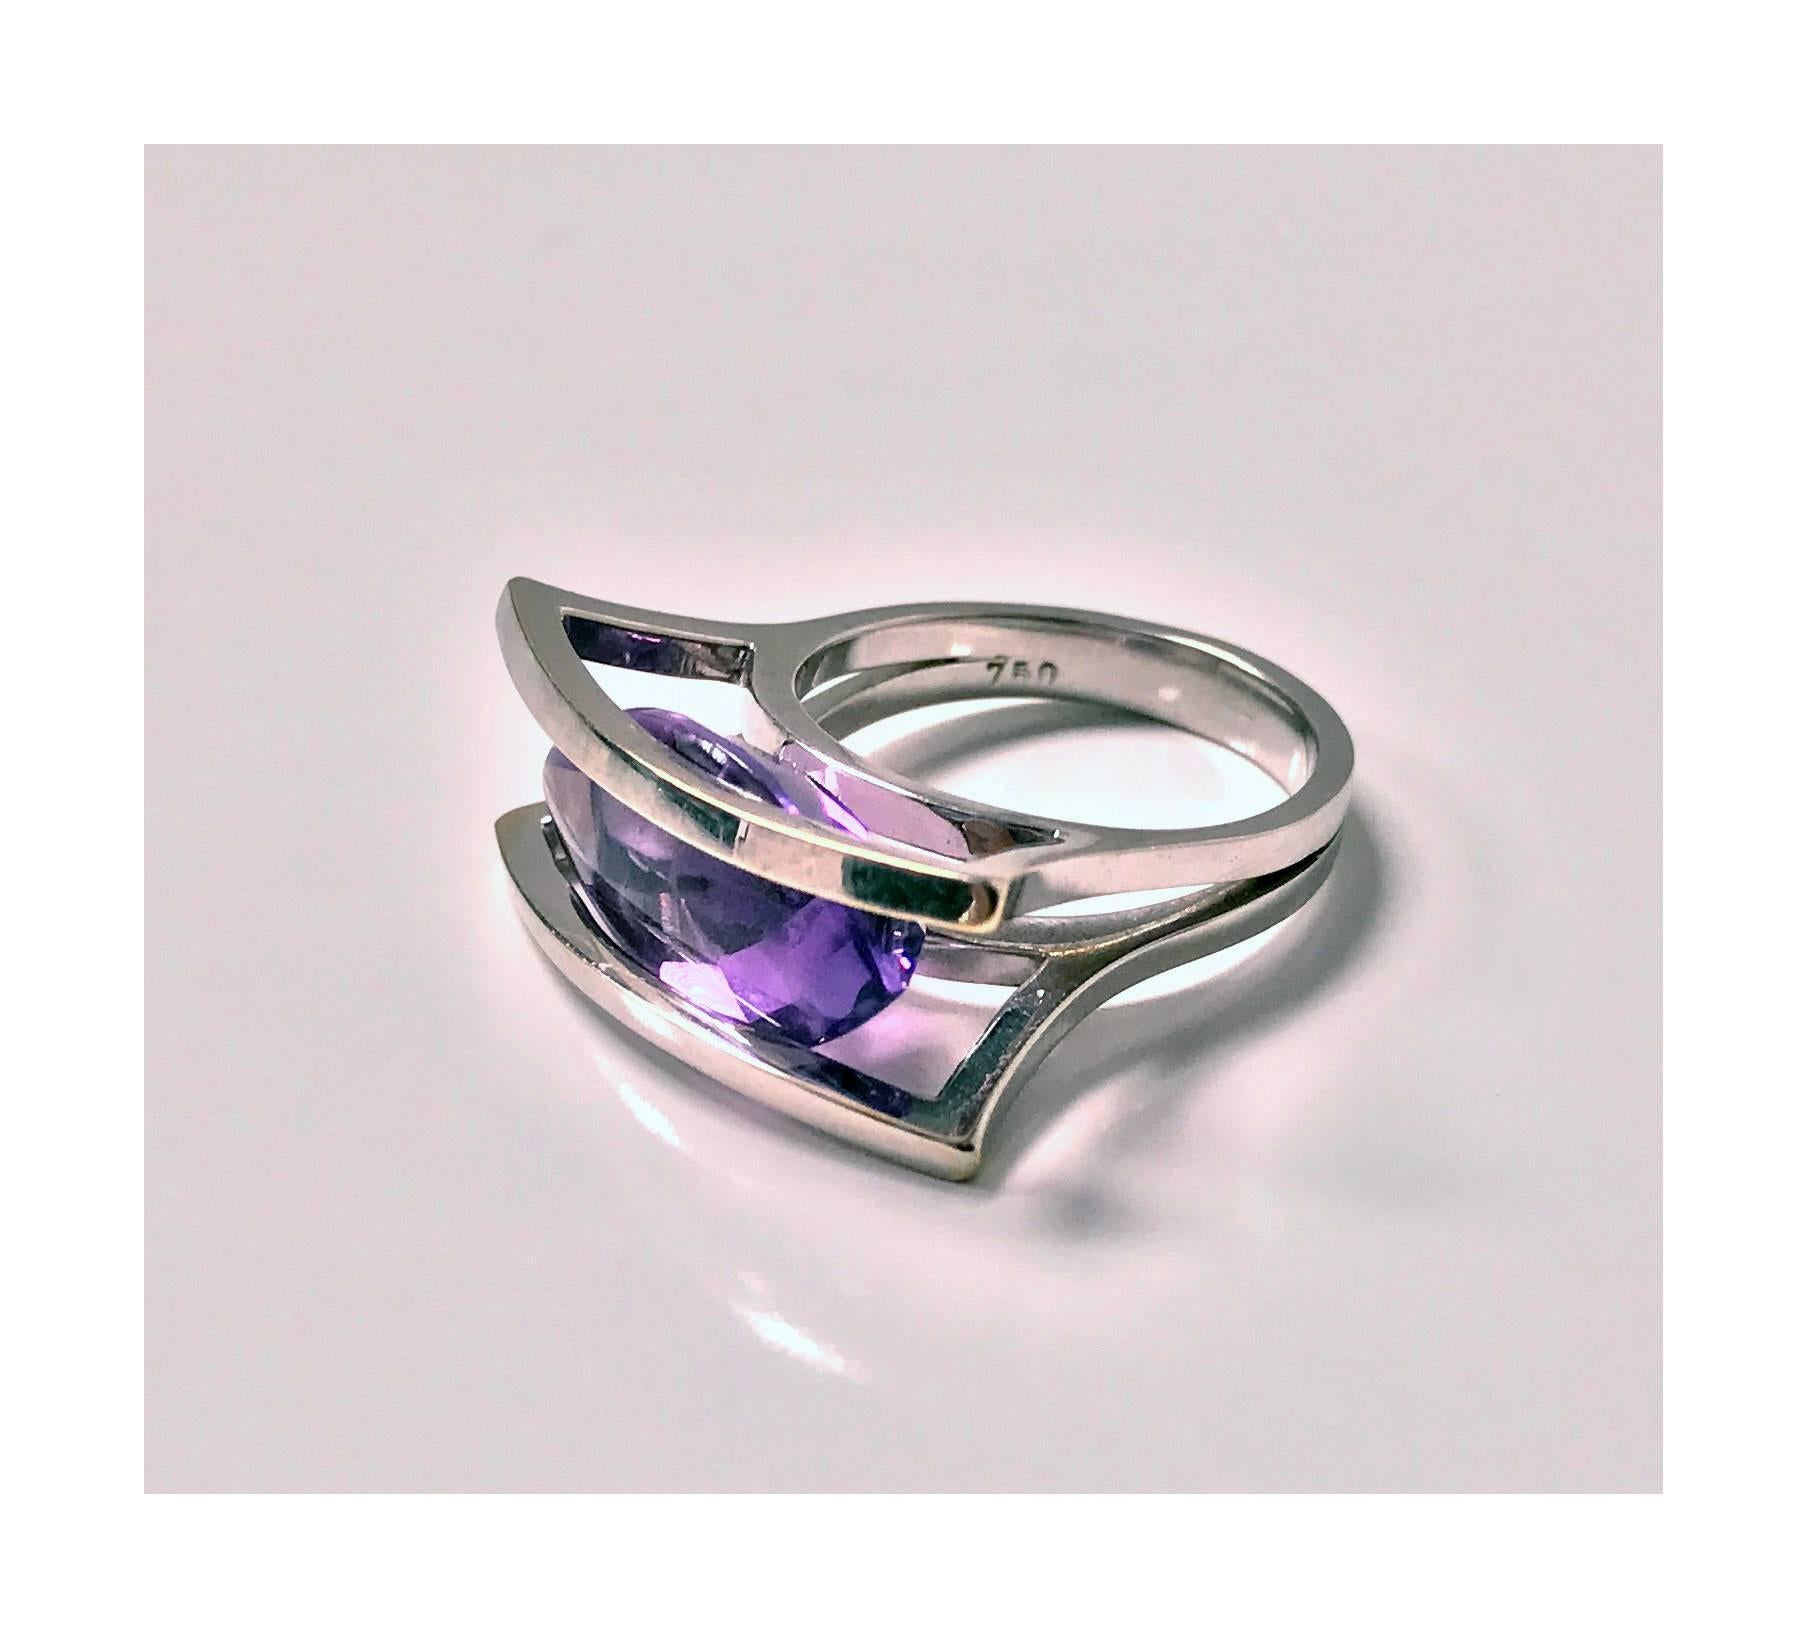 18K white gold and Amethyst modernist abstract Ring, 20th century. The ring mount of a double edge horizontal hemi spherical open design set in the centre with a purple navette shape purple amethyst. The amethyst gauging approximately 18.0 x 10.0 x